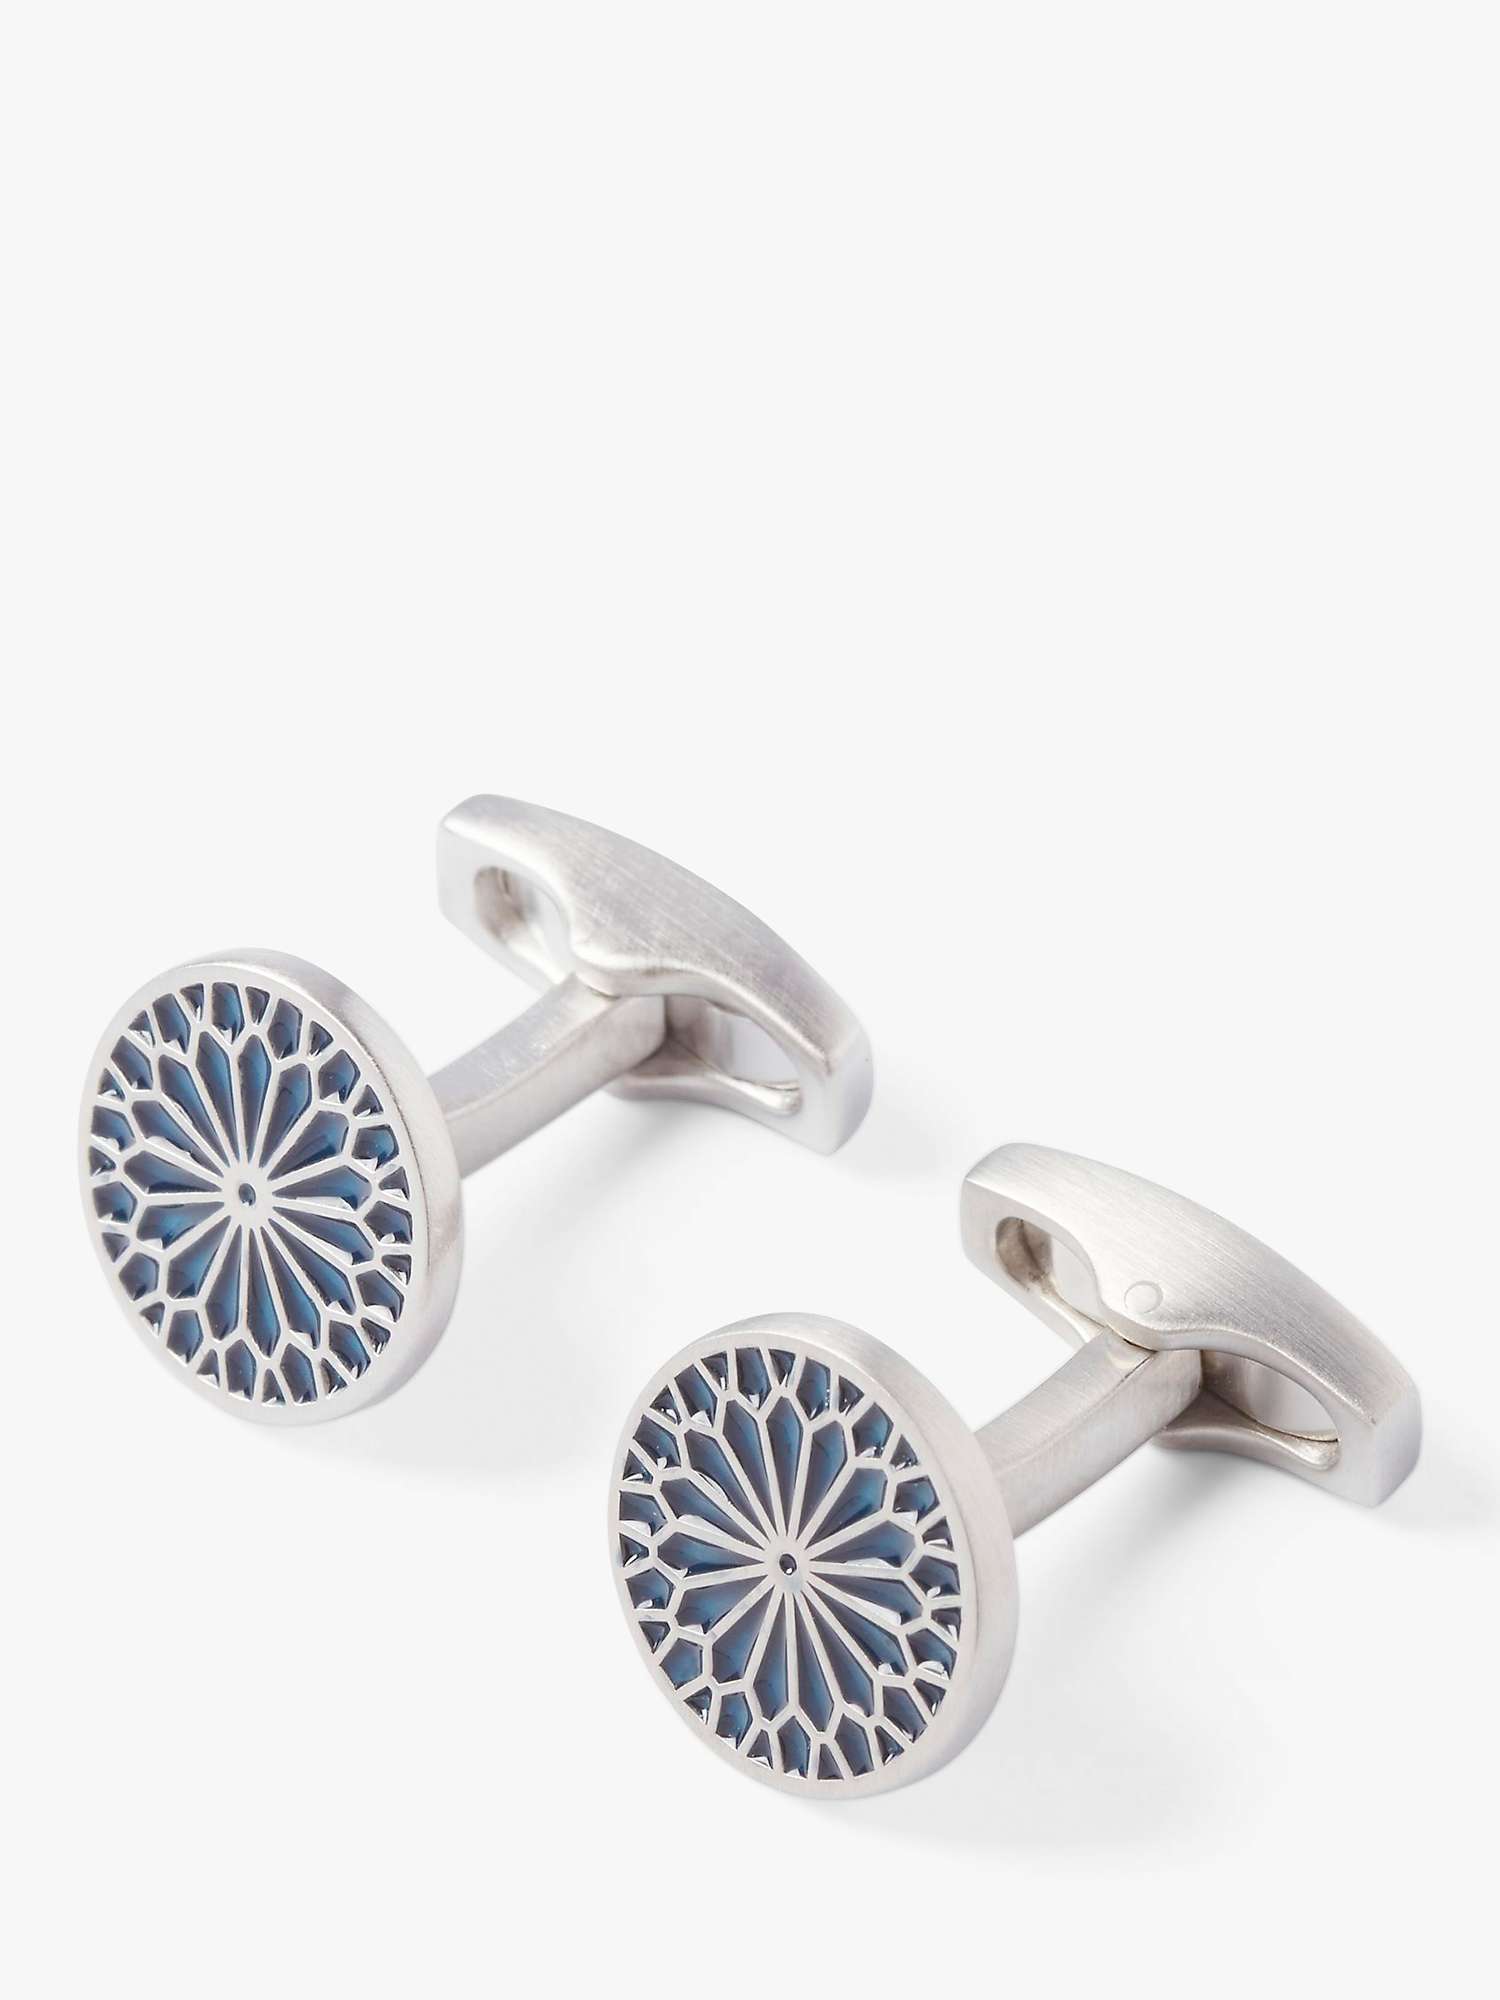 Buy Simon Carter Stained Glass Window Cufflinks, Navy Online at johnlewis.com